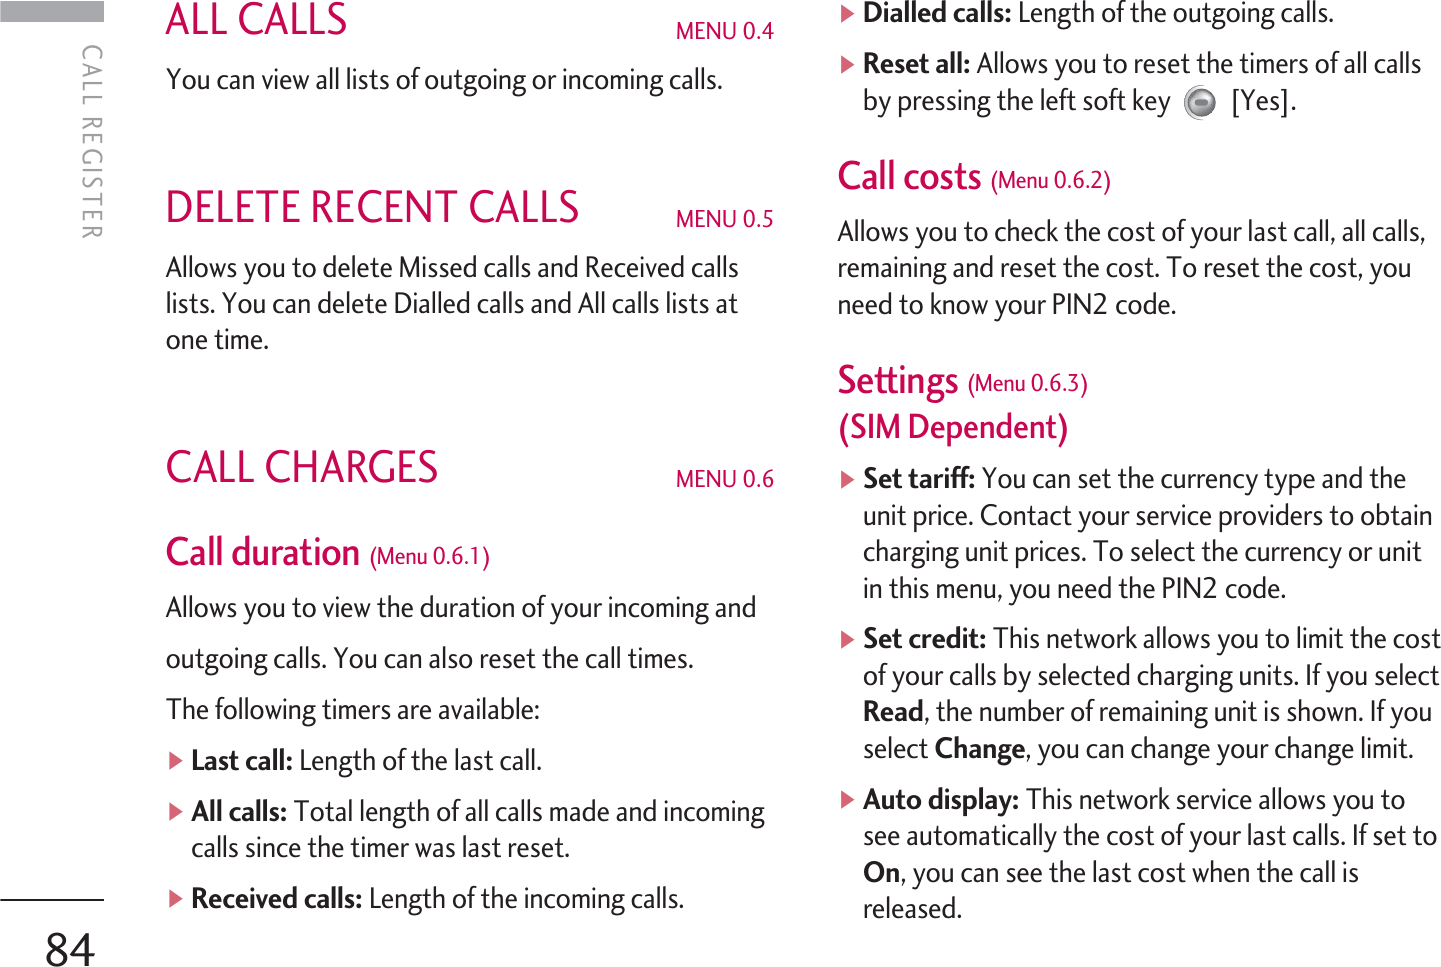 ALL CALLS MENU 0.4You can view all lists of outgoing or incoming calls.DELETE RECENT CALLS MENU 0.5 Allows you to delete Missed calls and Received callslists. You can delete Dialled calls and All calls lists atone time.CALL CHARGES MENU 0.6Call duration (Menu 0.6.1) Allows you to view the duration of your incoming andoutgoing calls. You can also reset the call times.The following timers are available:]Last call: Length of the last call.]All calls: Total length of all calls made and incomingcalls since the timer was last reset.]Received calls: Length of the incoming calls.]Dialled calls: Length of the outgoing calls.]Reset all: Allows you to reset the timers of all callsby pressing the left soft key [Yes].Call costs (Menu 0.6.2)Allows you to check the cost of your last call, all calls,remaining and reset the cost. To reset the cost, youneed to know your PIN2 code.Settings (Menu 0.6.3) (SIM Dependent)]Set tariff: You can set the currency type and theunit price. Contact your service providers to obtaincharging unit prices. To select the currency or unitin this menu, you need the PIN2 code.]Set credit: This network allows you to limit the costof your calls by selected charging units. If you selectRead, the number of remaining unit is shown. If youselect Change, you can change your change limit.]Auto display: This network service allows you tosee automatically the cost of your last calls. If set toOn, you can see the last cost when the call isreleased.CALL REGISTERCALL REGISTER84